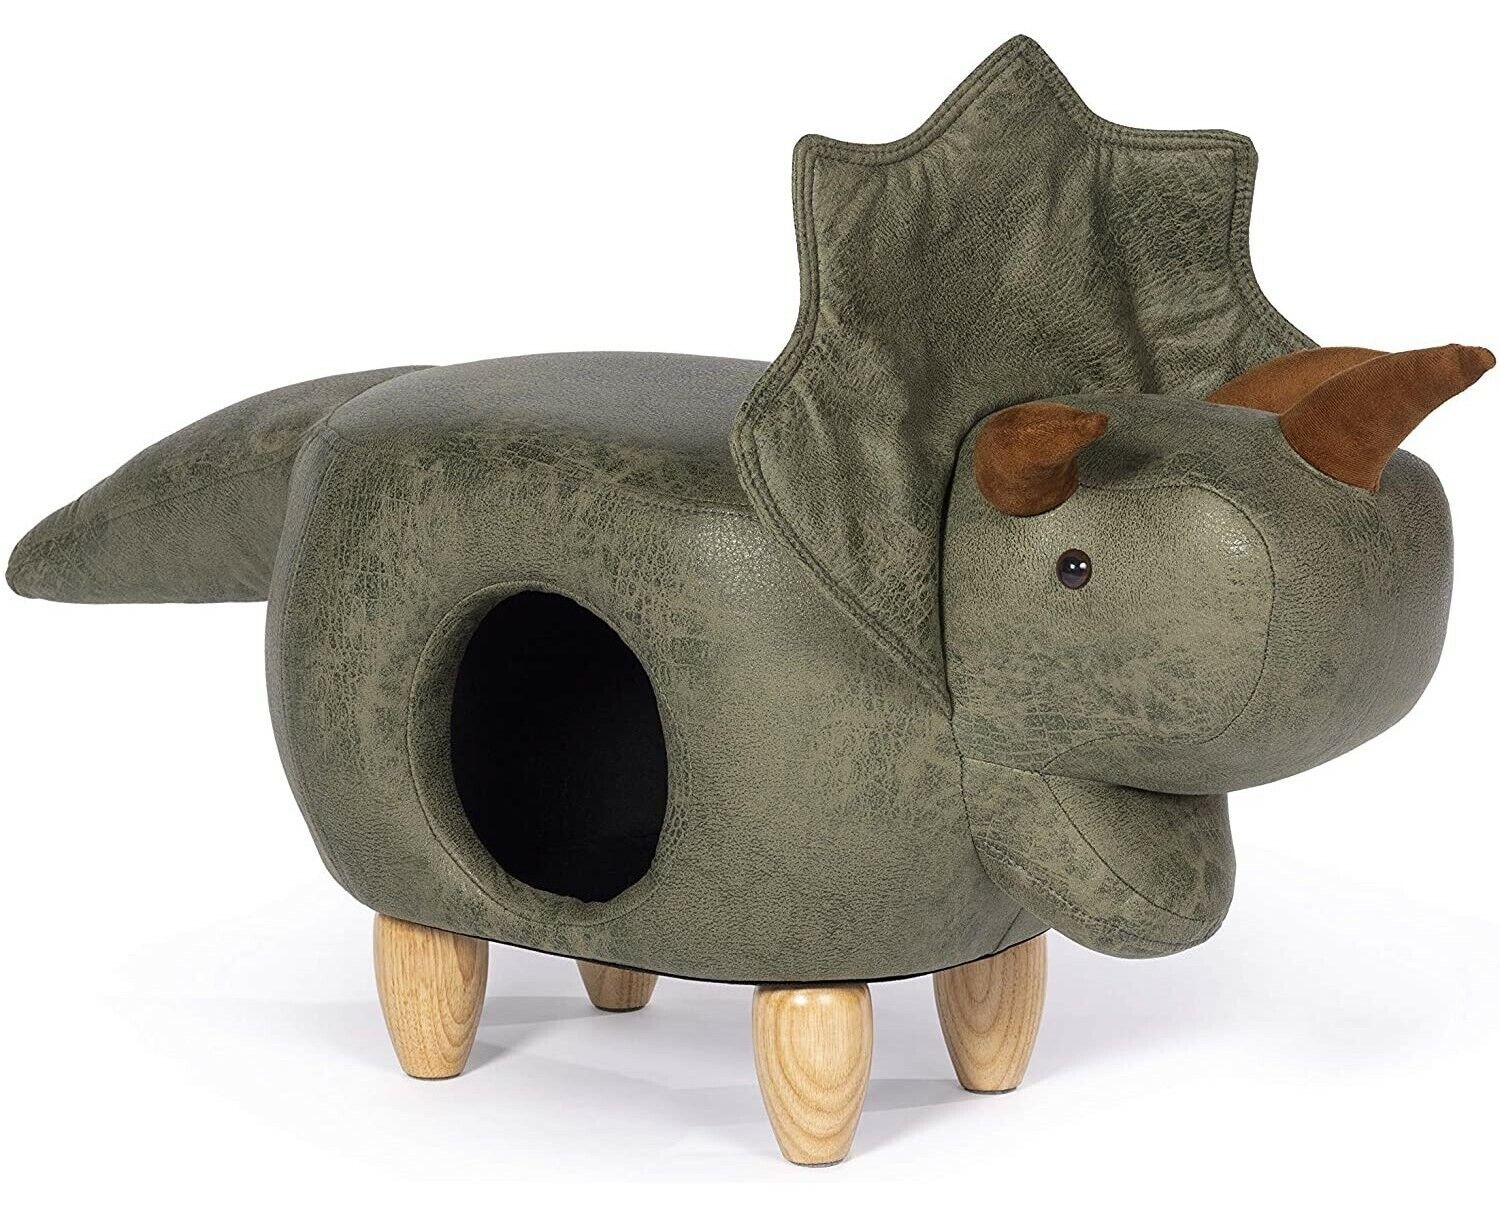 PREVUE PET TRICERATOPS DINOSAUR OTTOMAN-FREE SHIPPING IN THE U.S.